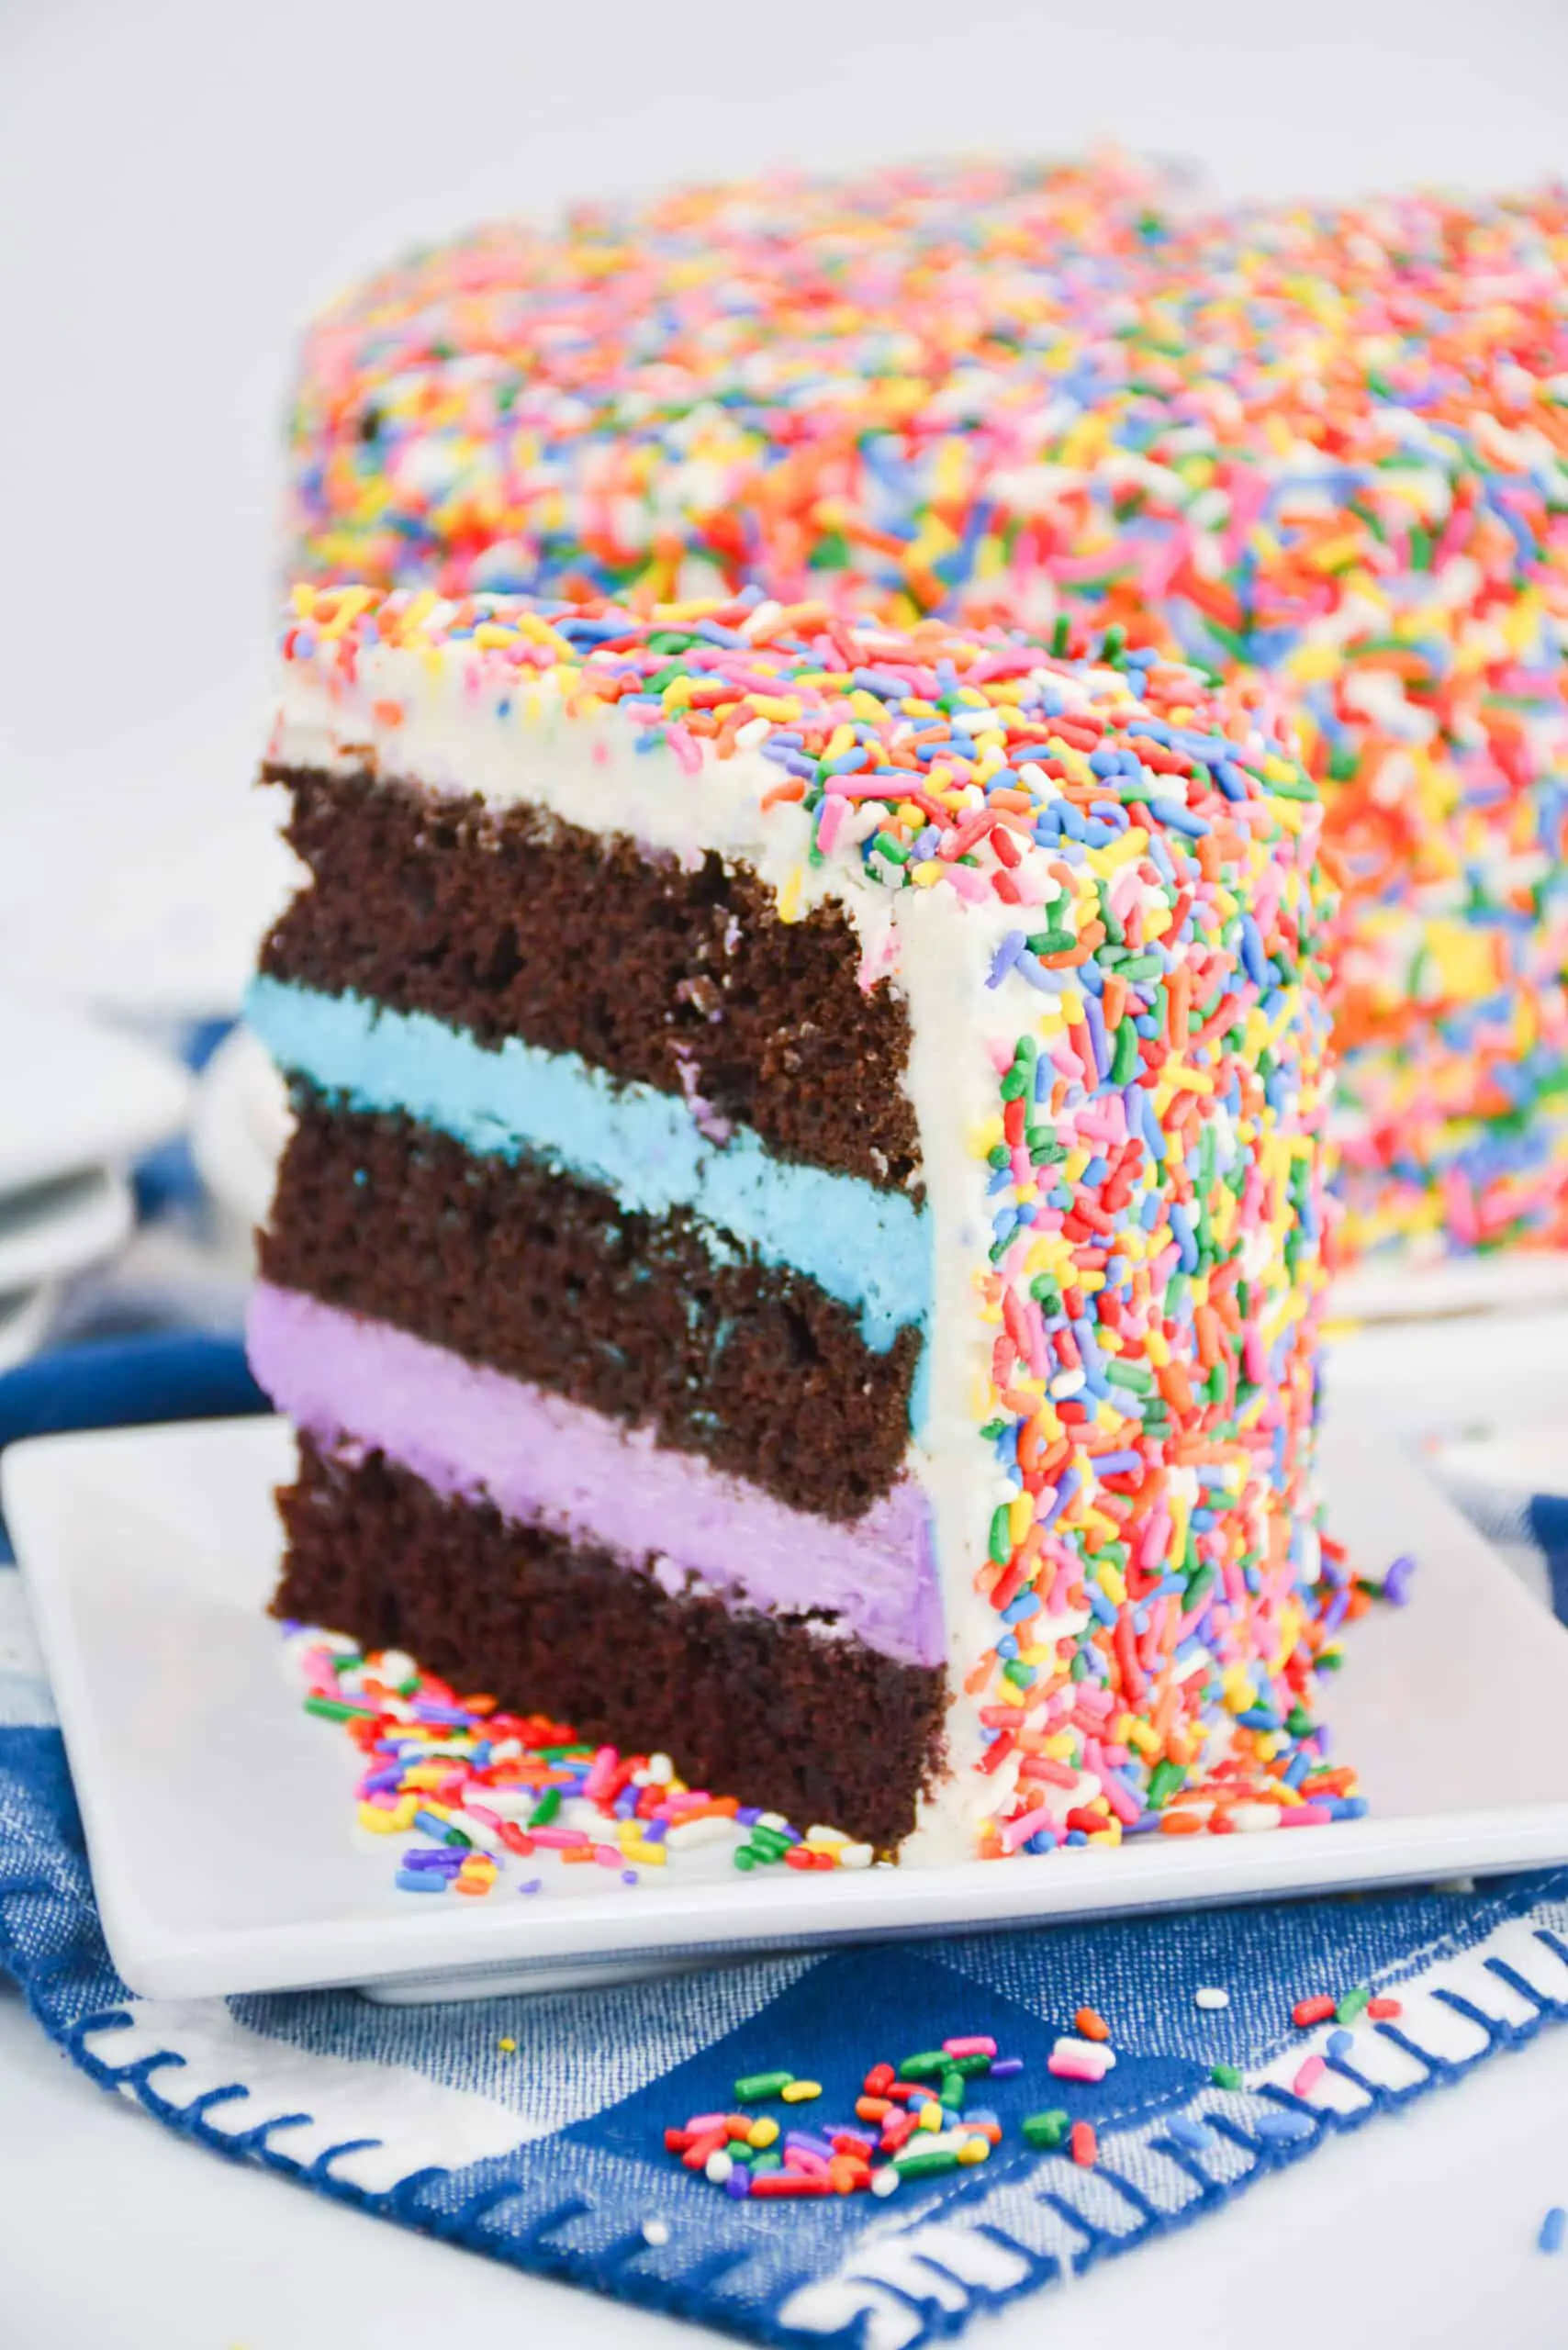 How To Make A Rainbow Cake At Home